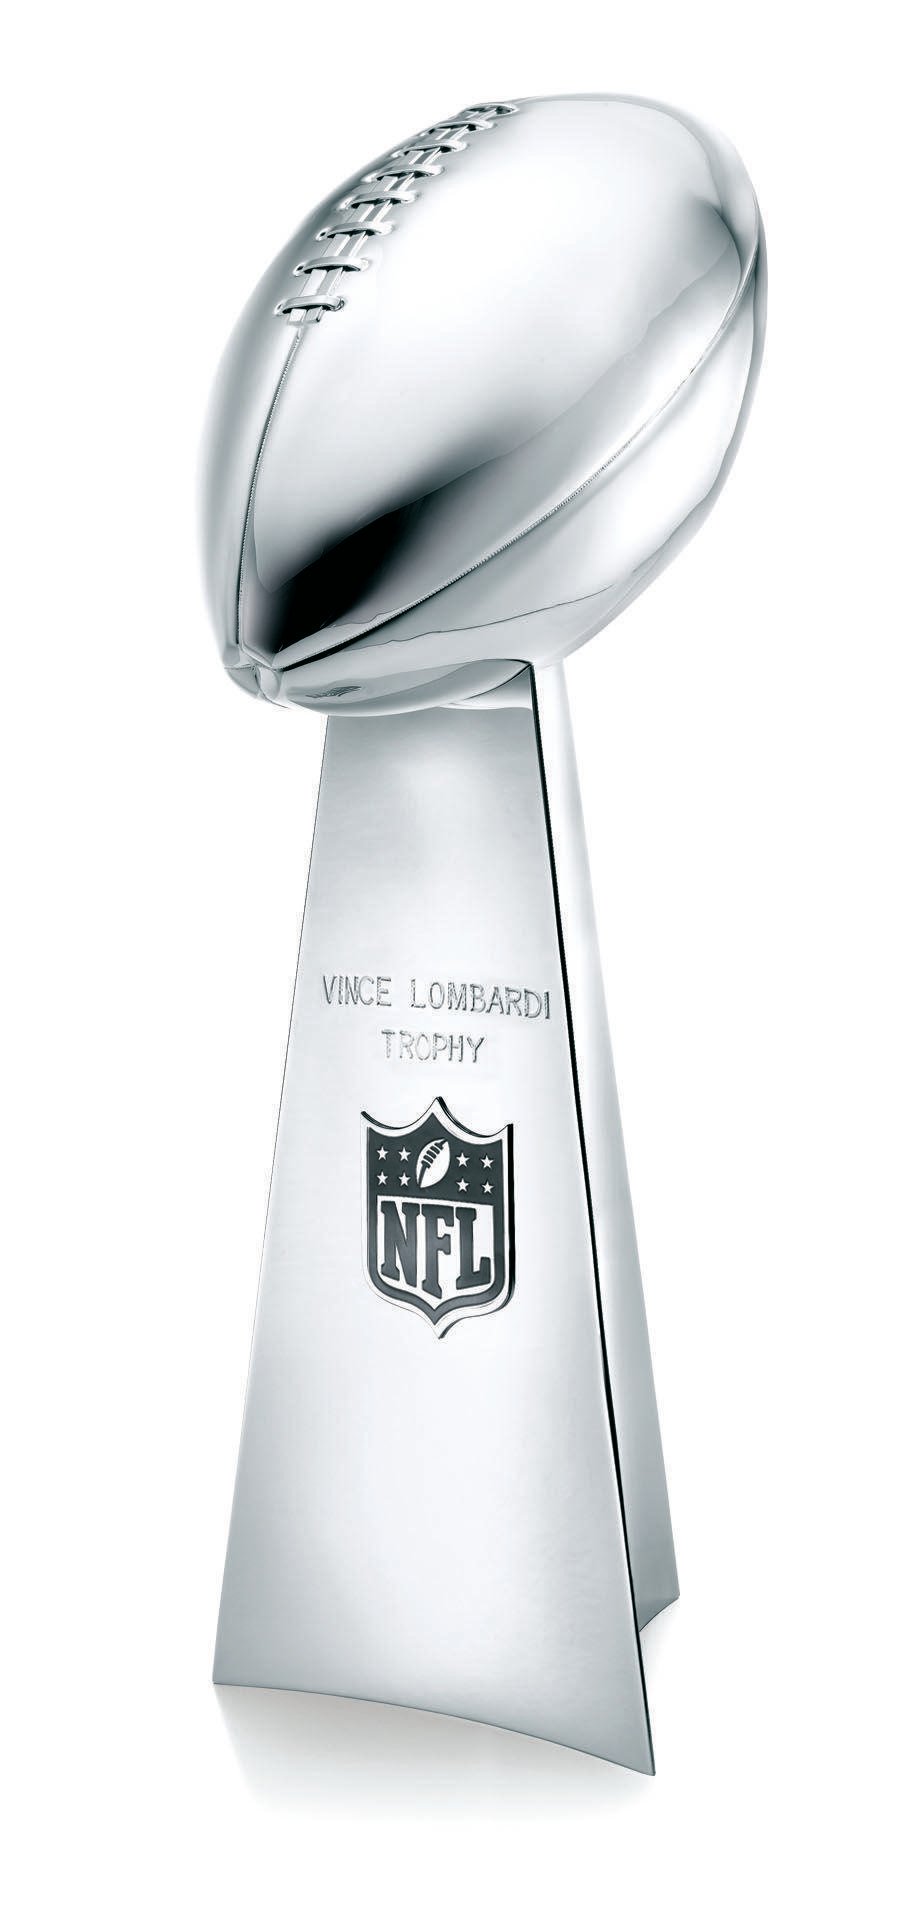 The Vince Lombardi Trophy is awarded annually